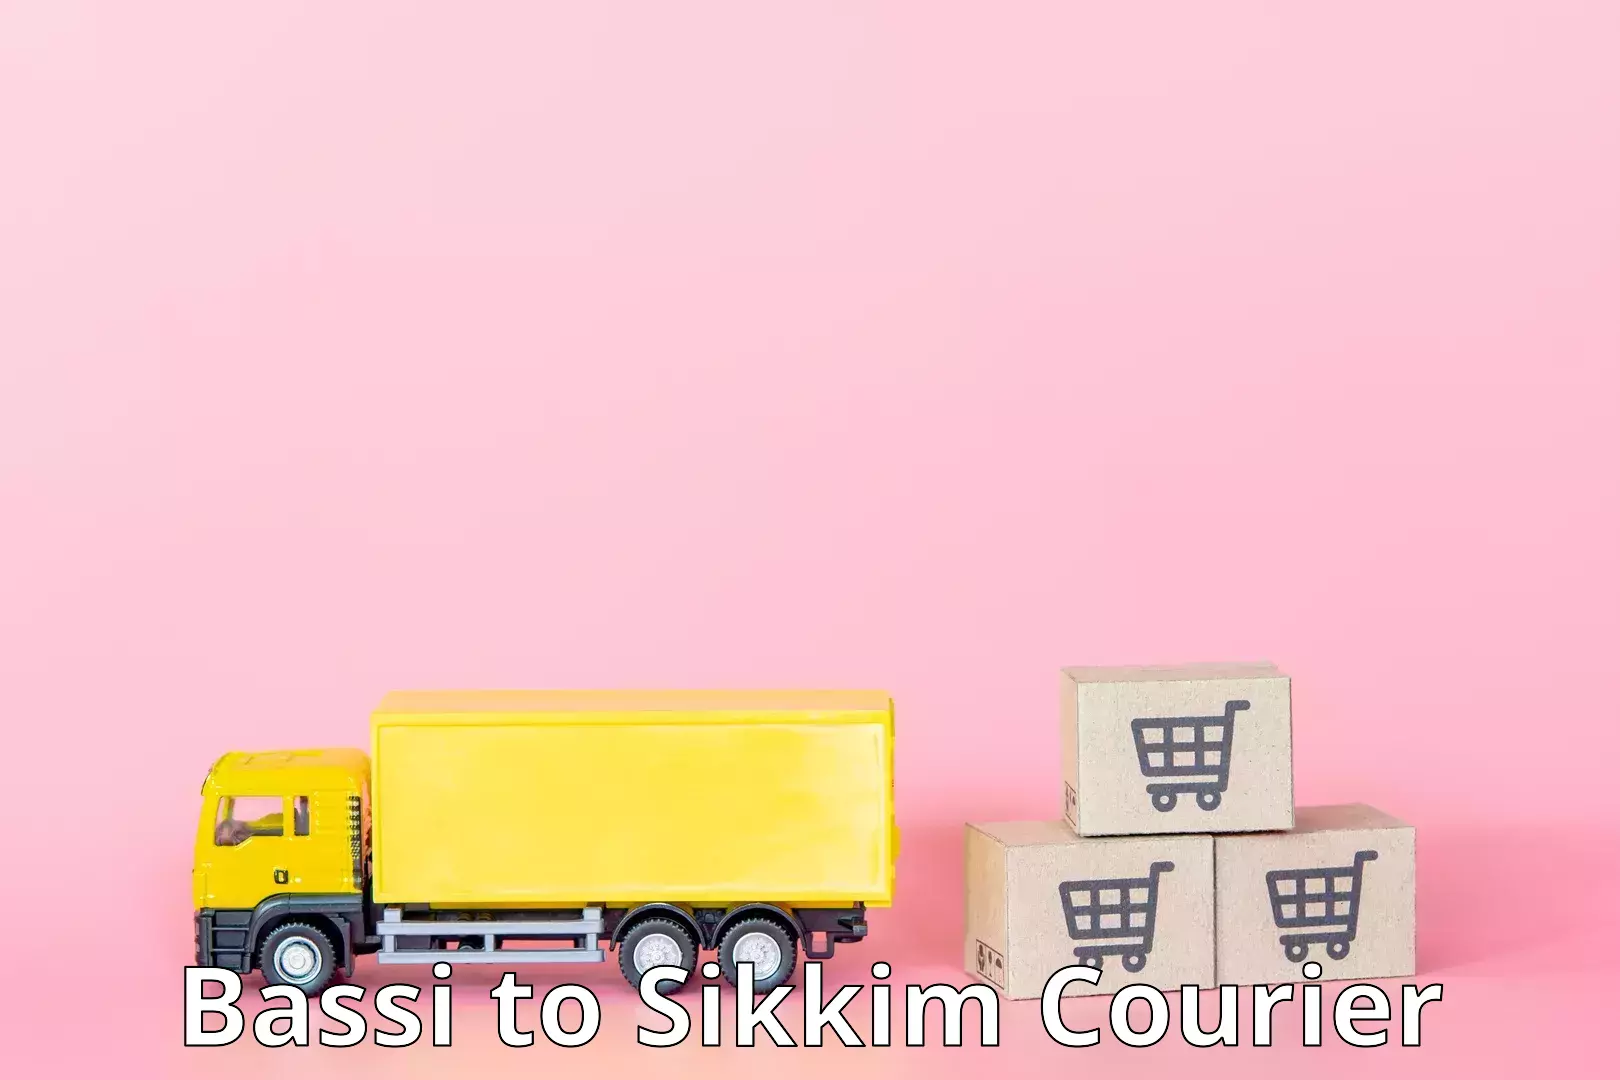 User-friendly courier app Bassi to Sikkim